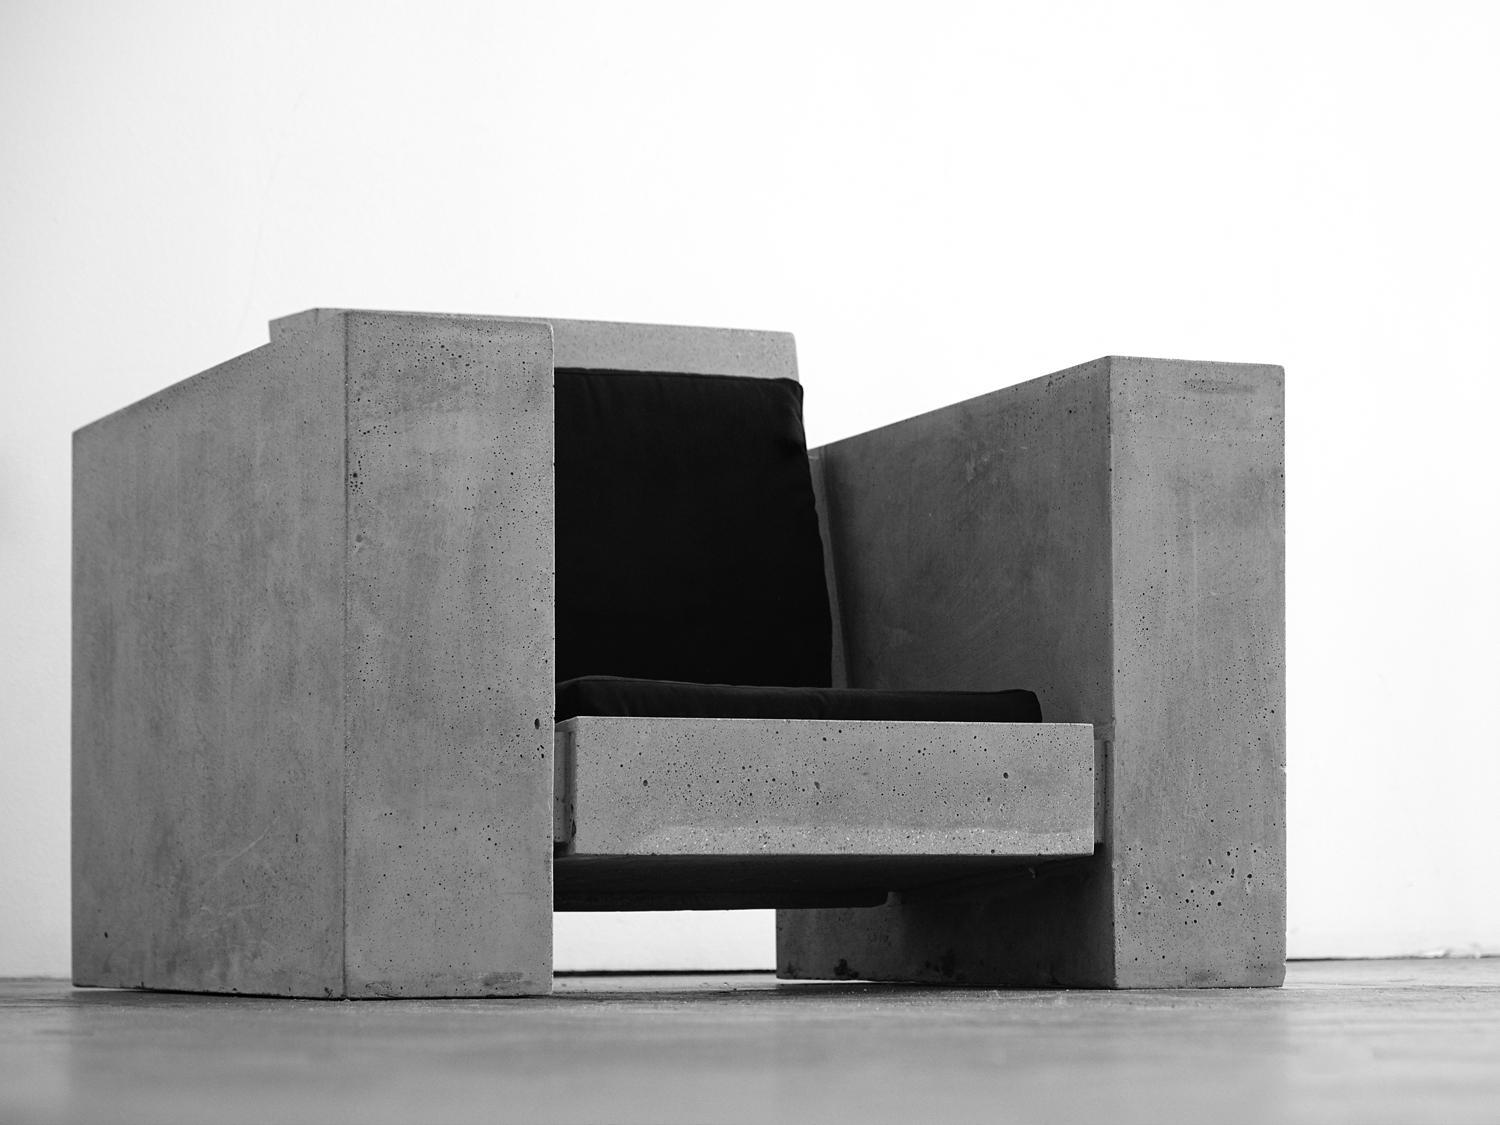 The first chair design by James de Wulf. Weighing 750 pounds, the Block Chair is a grounded landscape fixture. High loft cushions are molded into the seat, removable for laundering. This is an art piece that will last for generations.

Suitable for